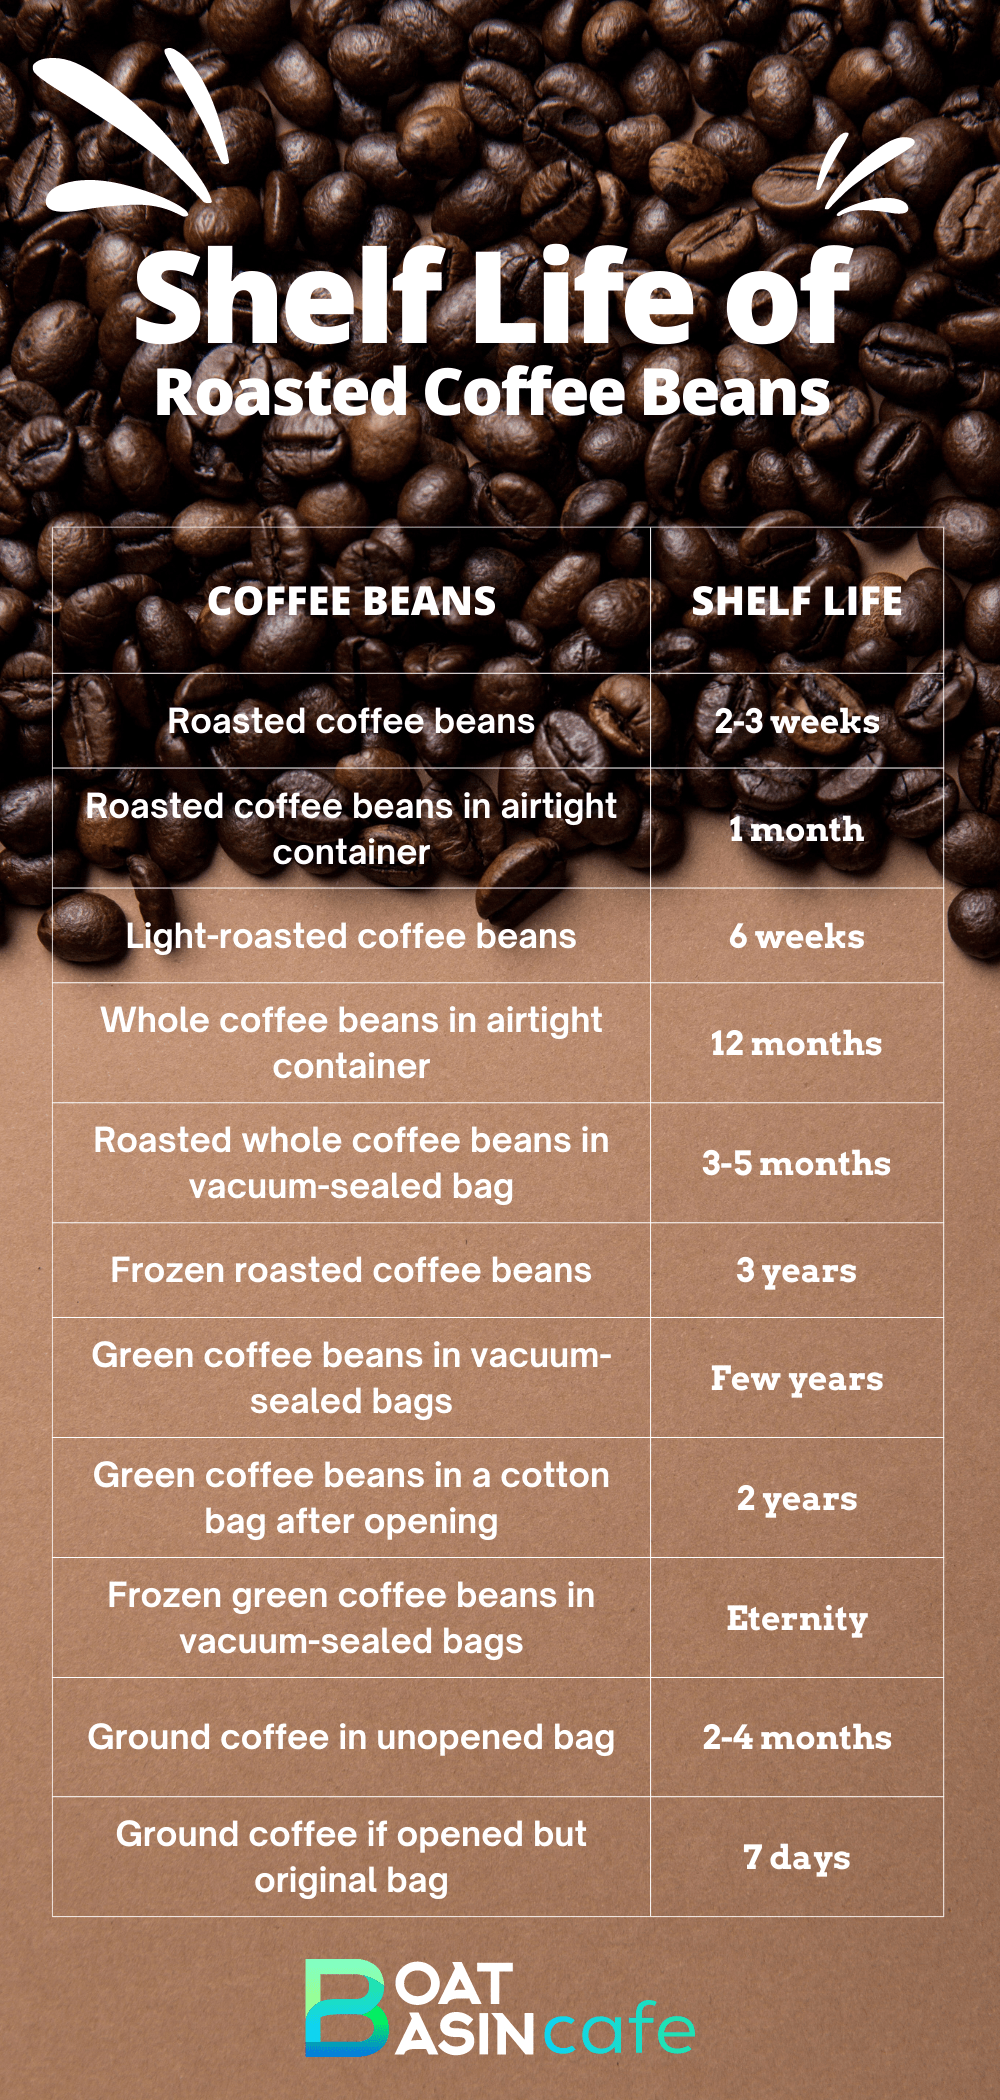 What’s The Shelf Life Of Whole Roasted Coffee Beans